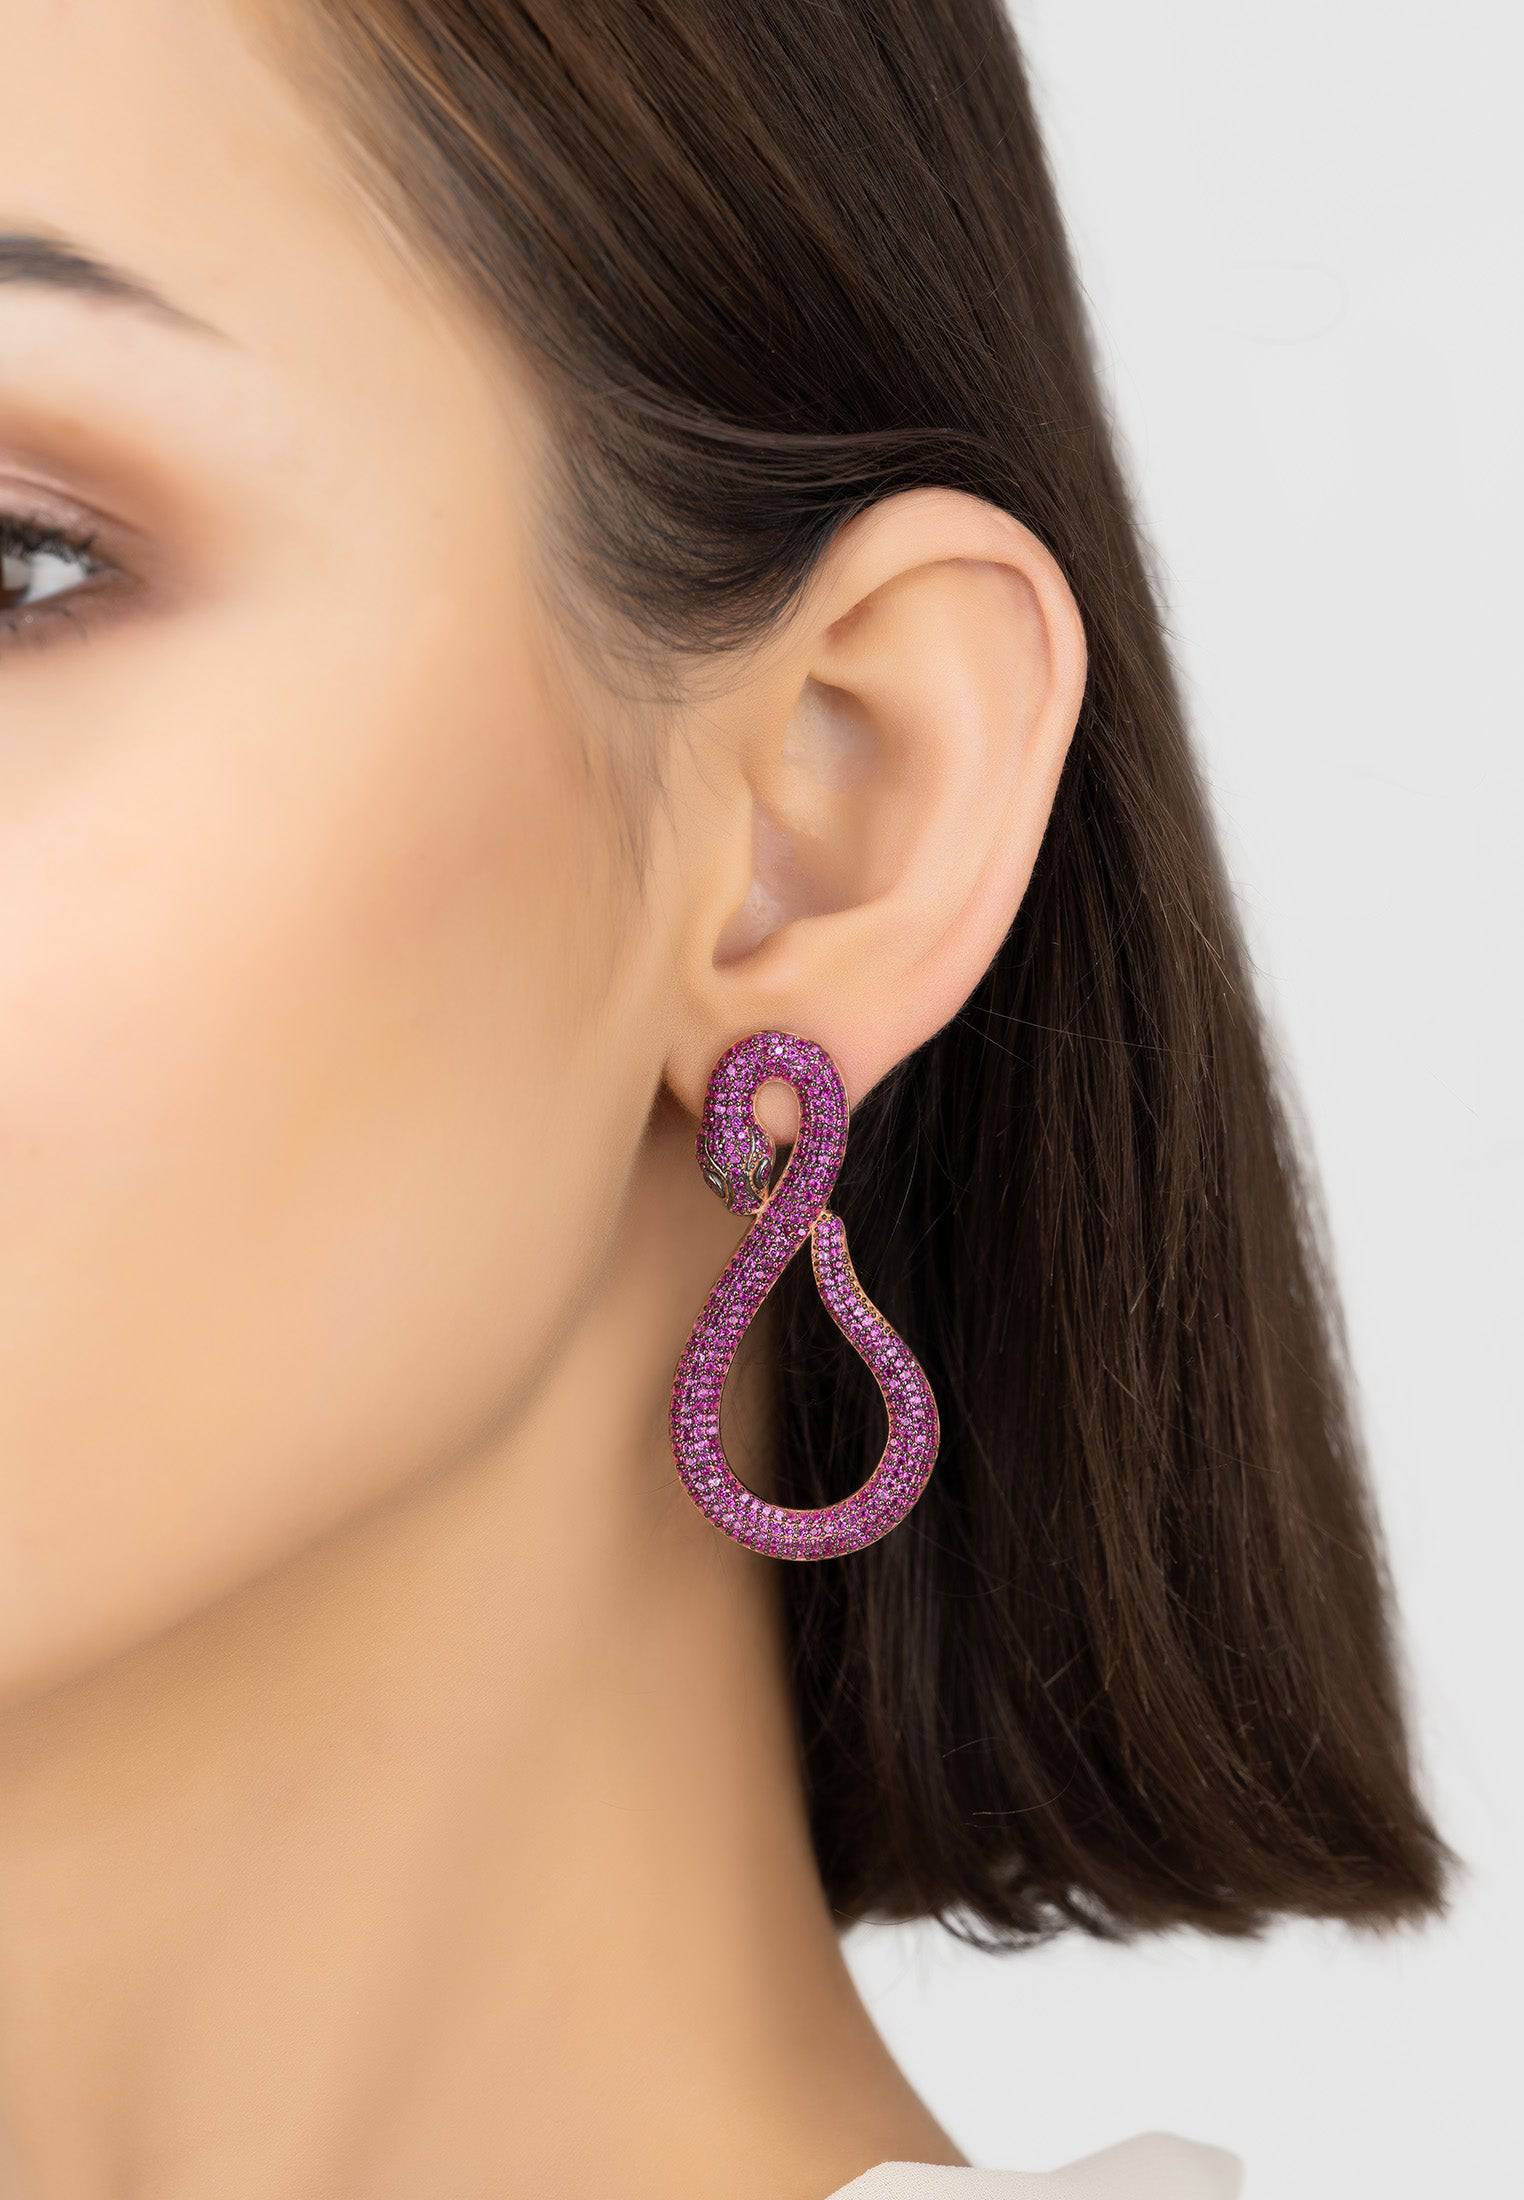 Rosegold Ruby Asp Snake Drop Earrings: Animal-Inspired Chic Jewelry - Jewelry & Watches - Bijou Her -  -  - 